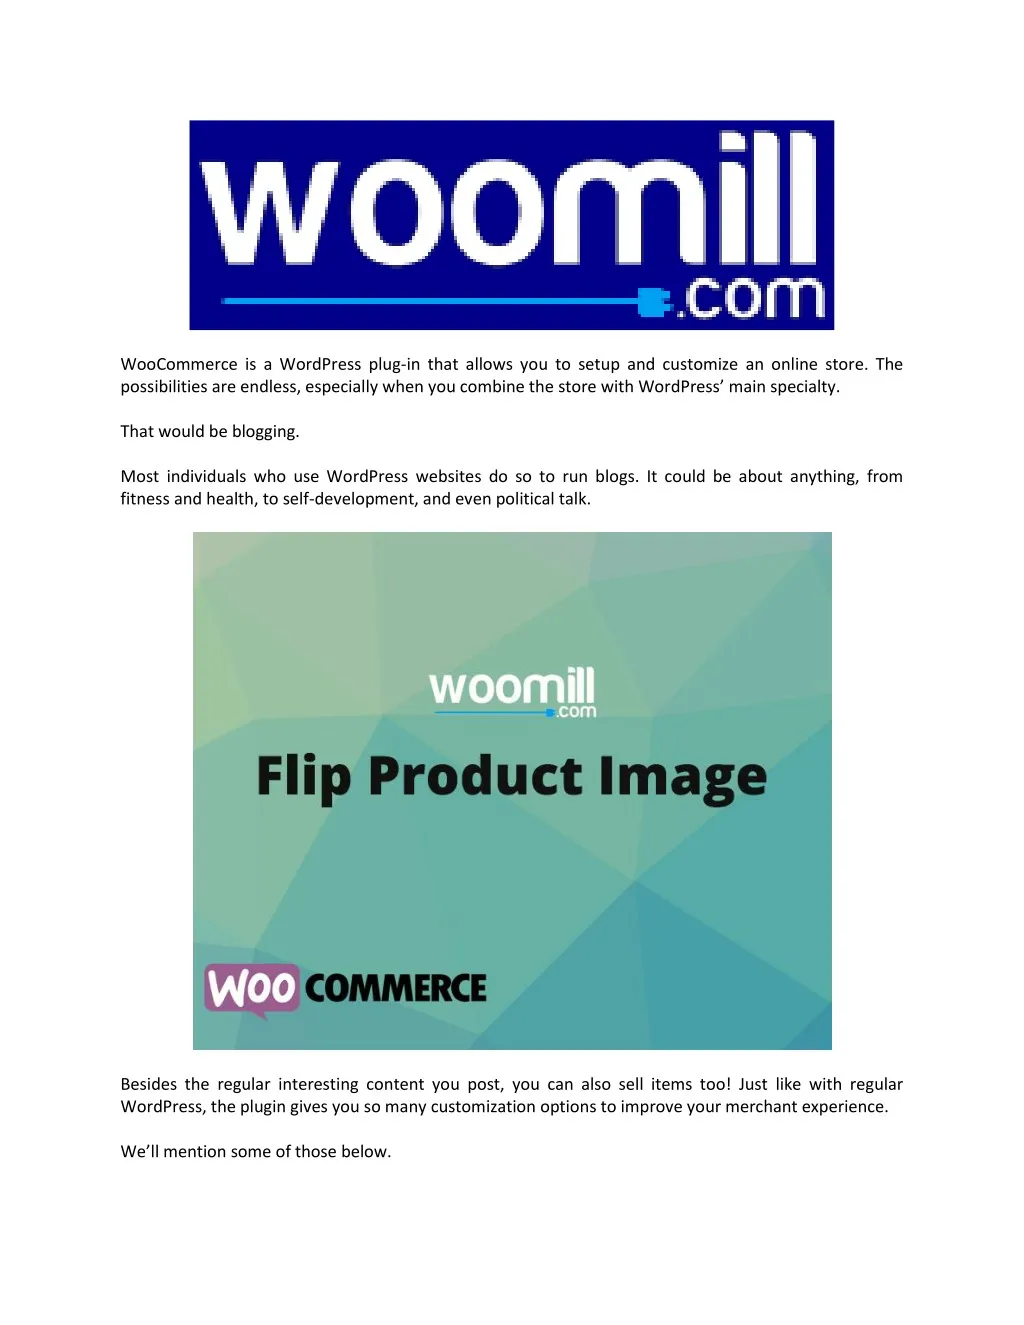 woocommerce is a wordpress plug in that allows